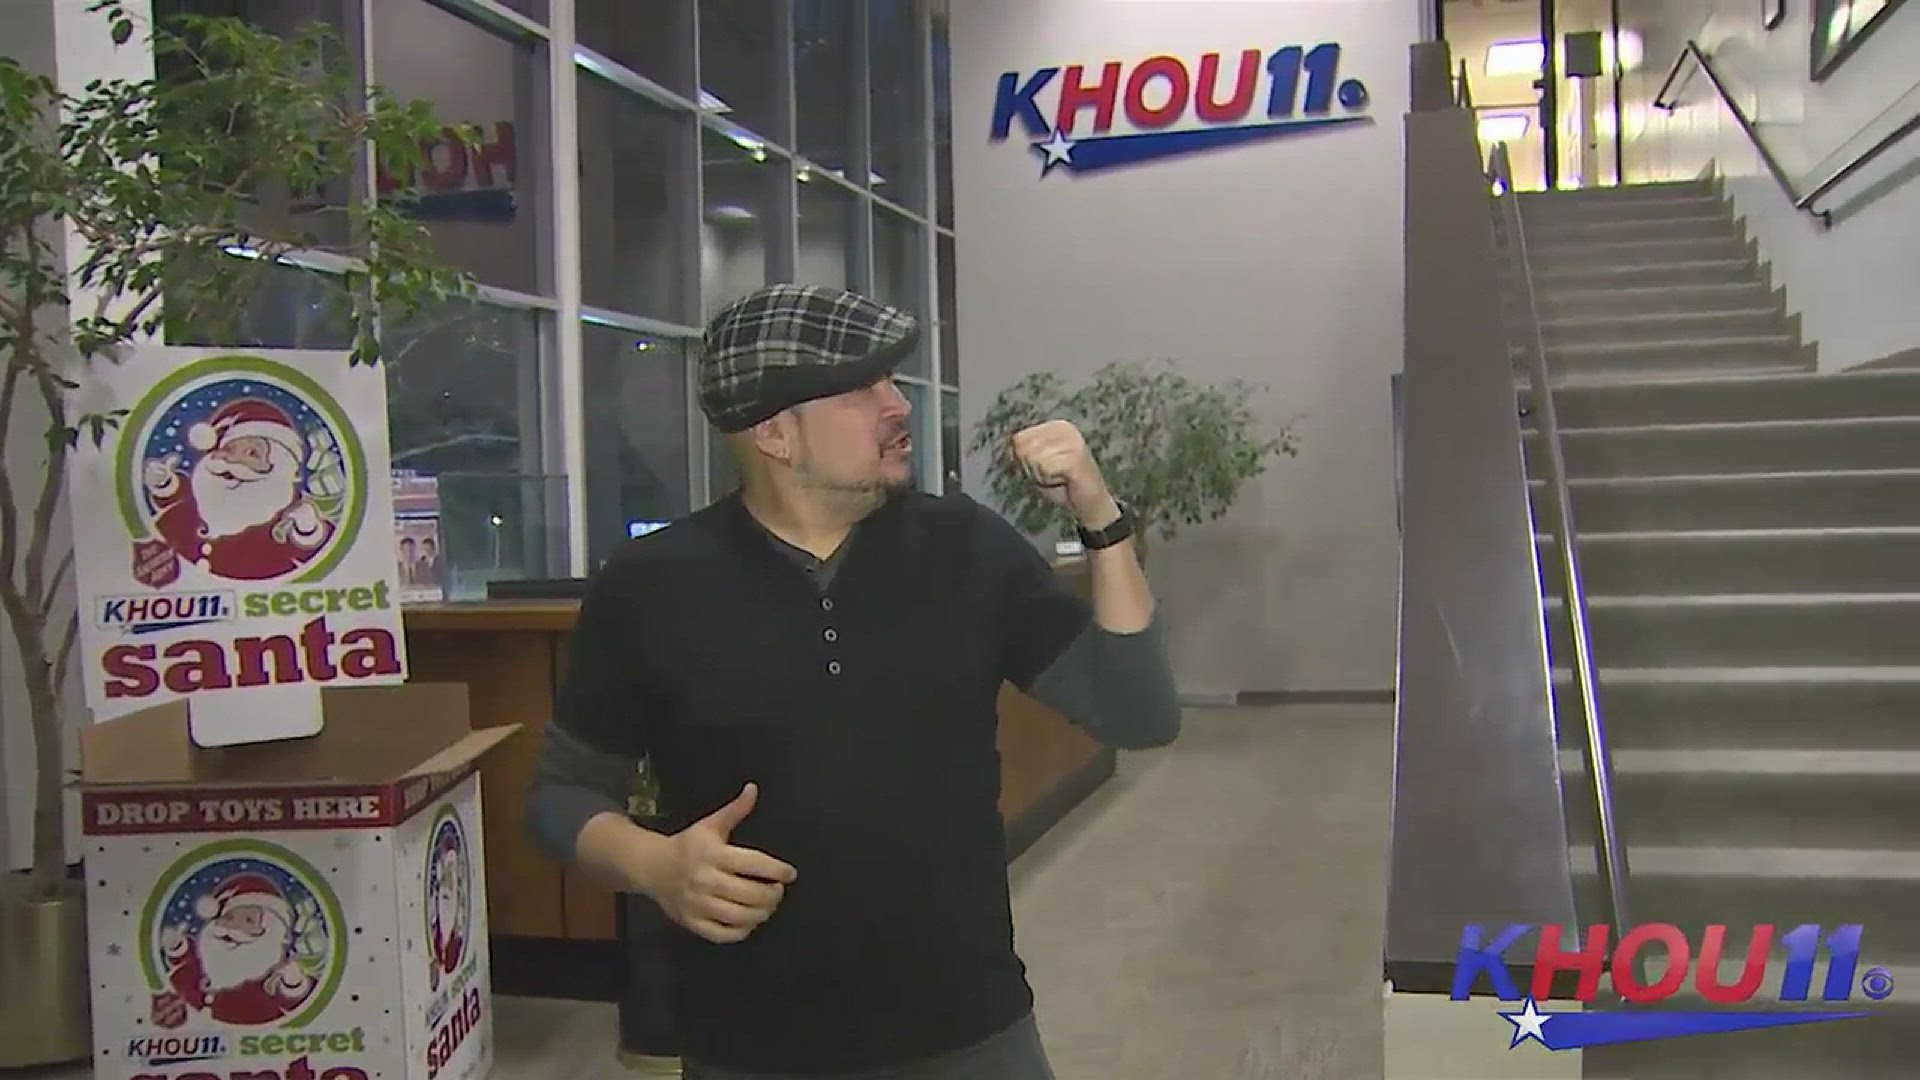 Houston native and magician Daniel Garcia took some time to stop by the KHOU studios to perform some of his amazing tricks for our staff. Check it out!